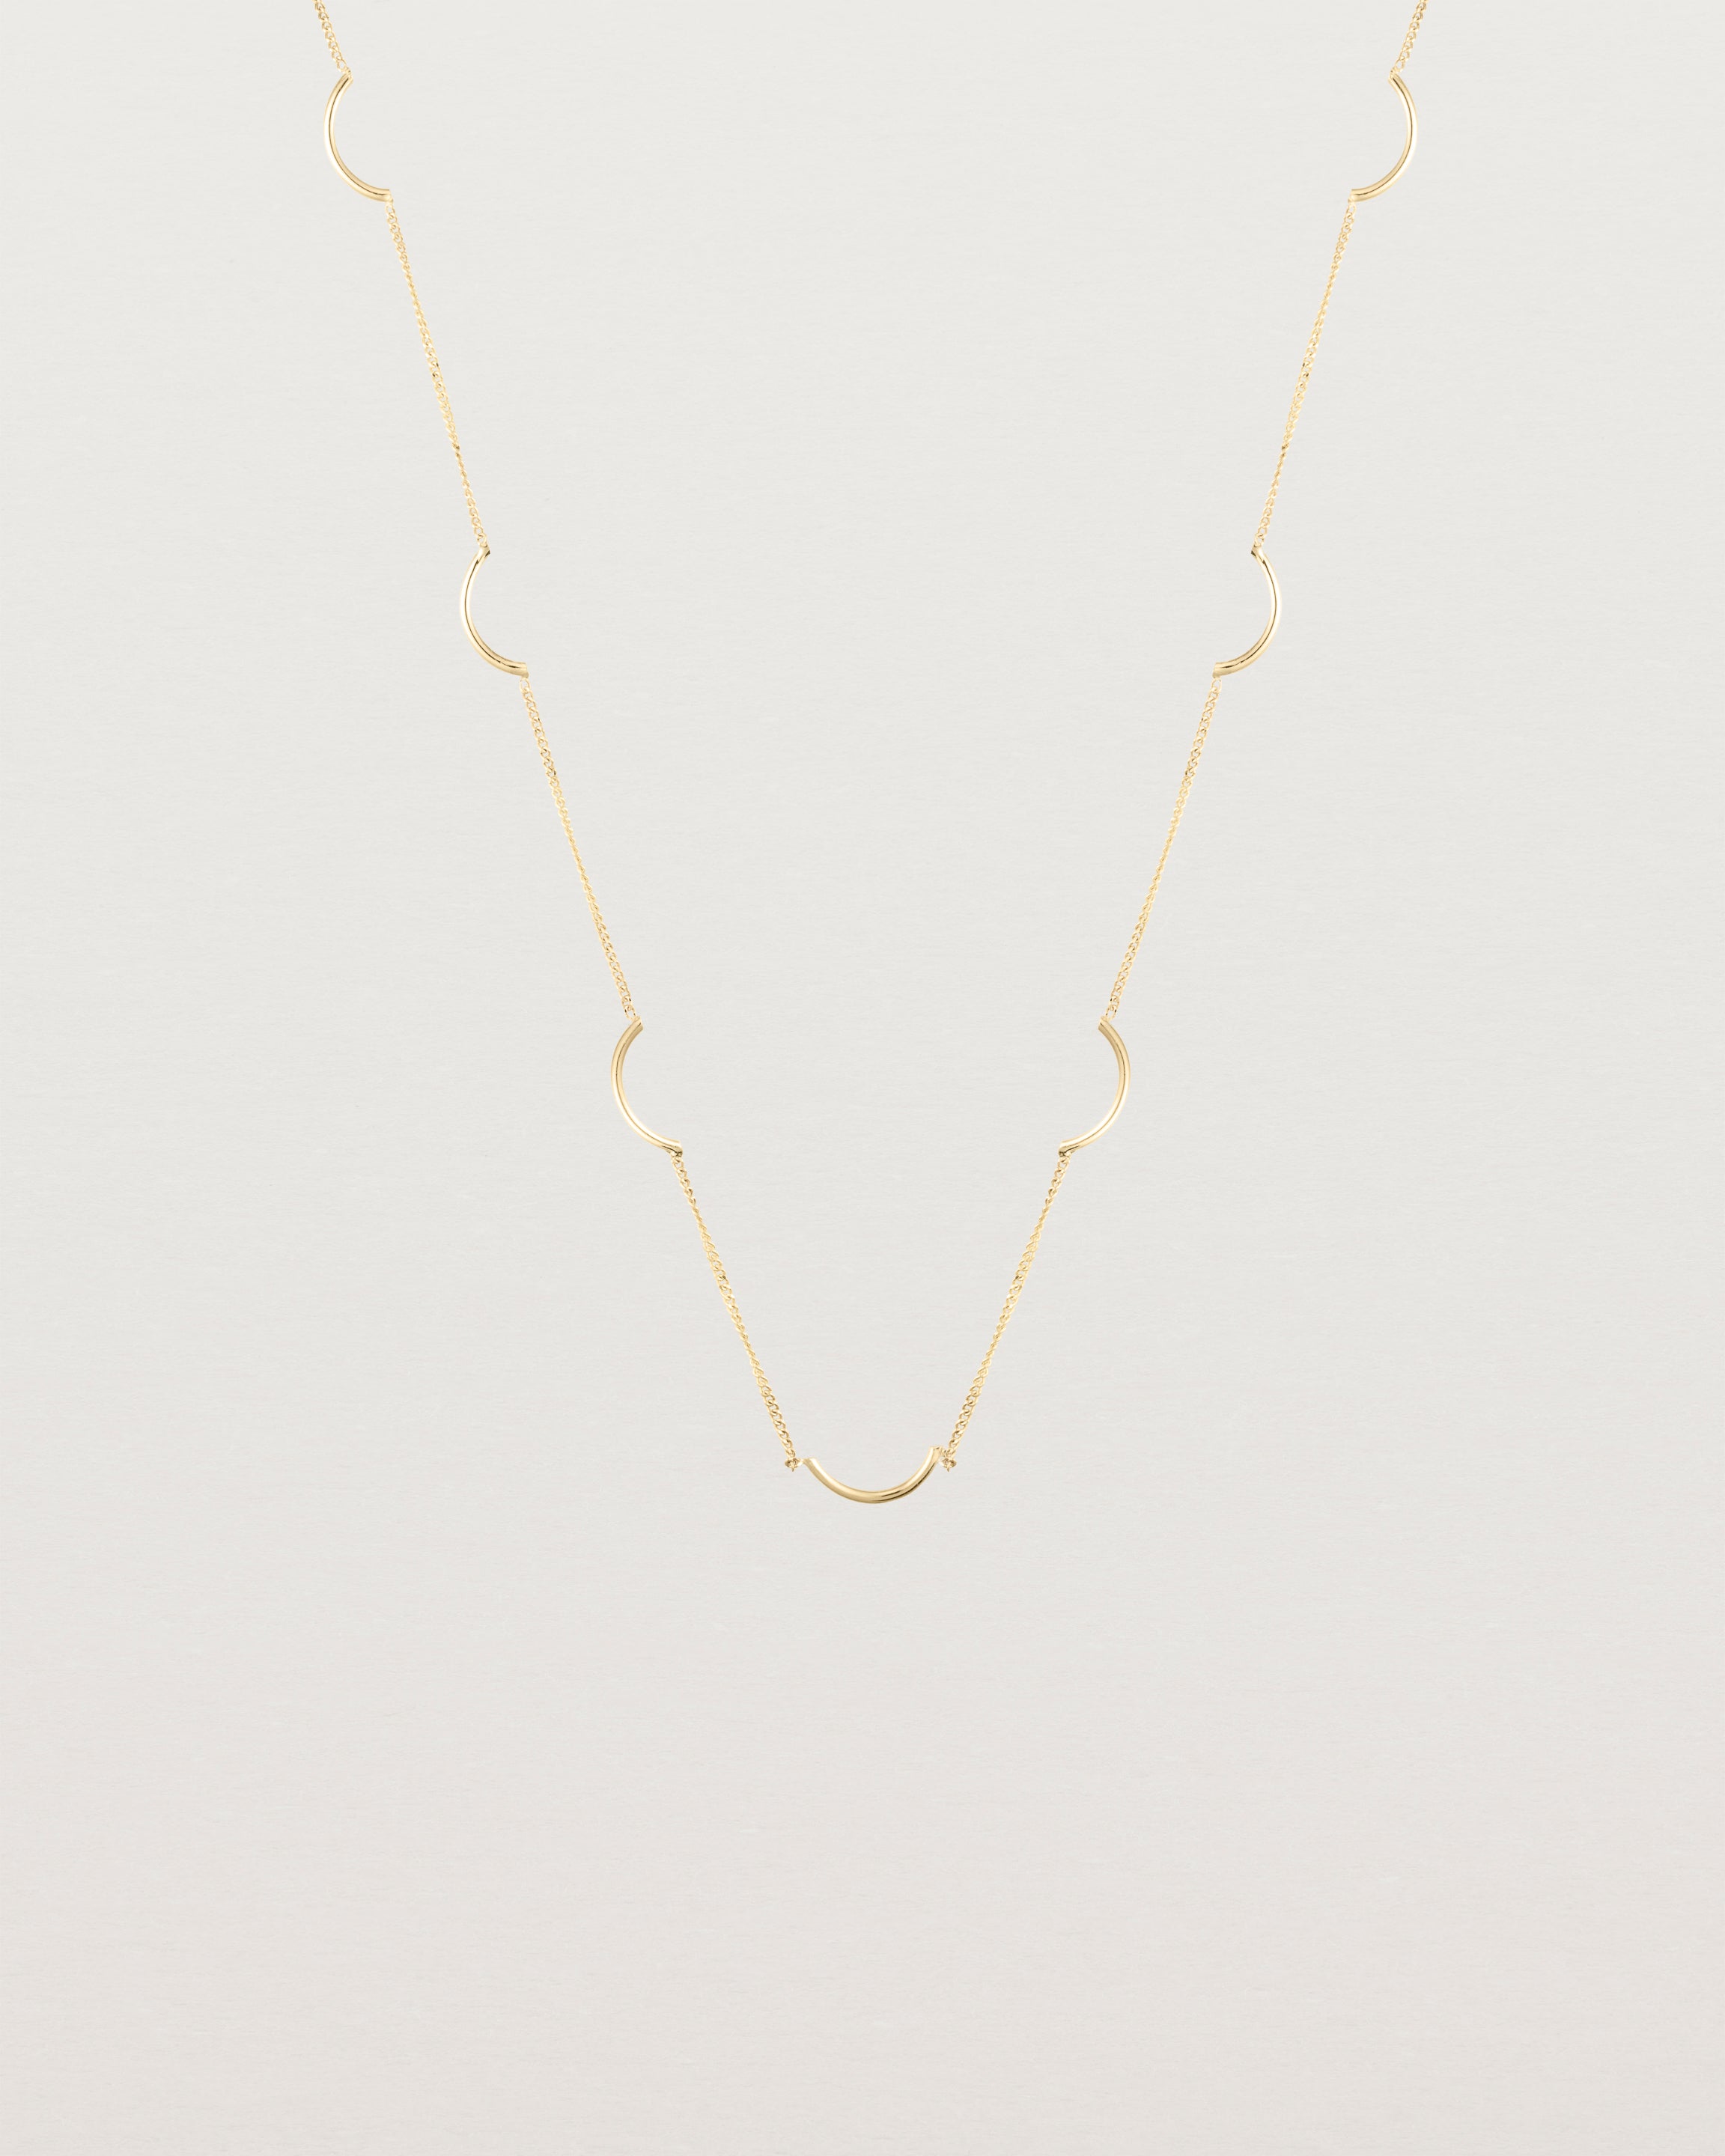 The Lai Chain Necklace in yellow gold.